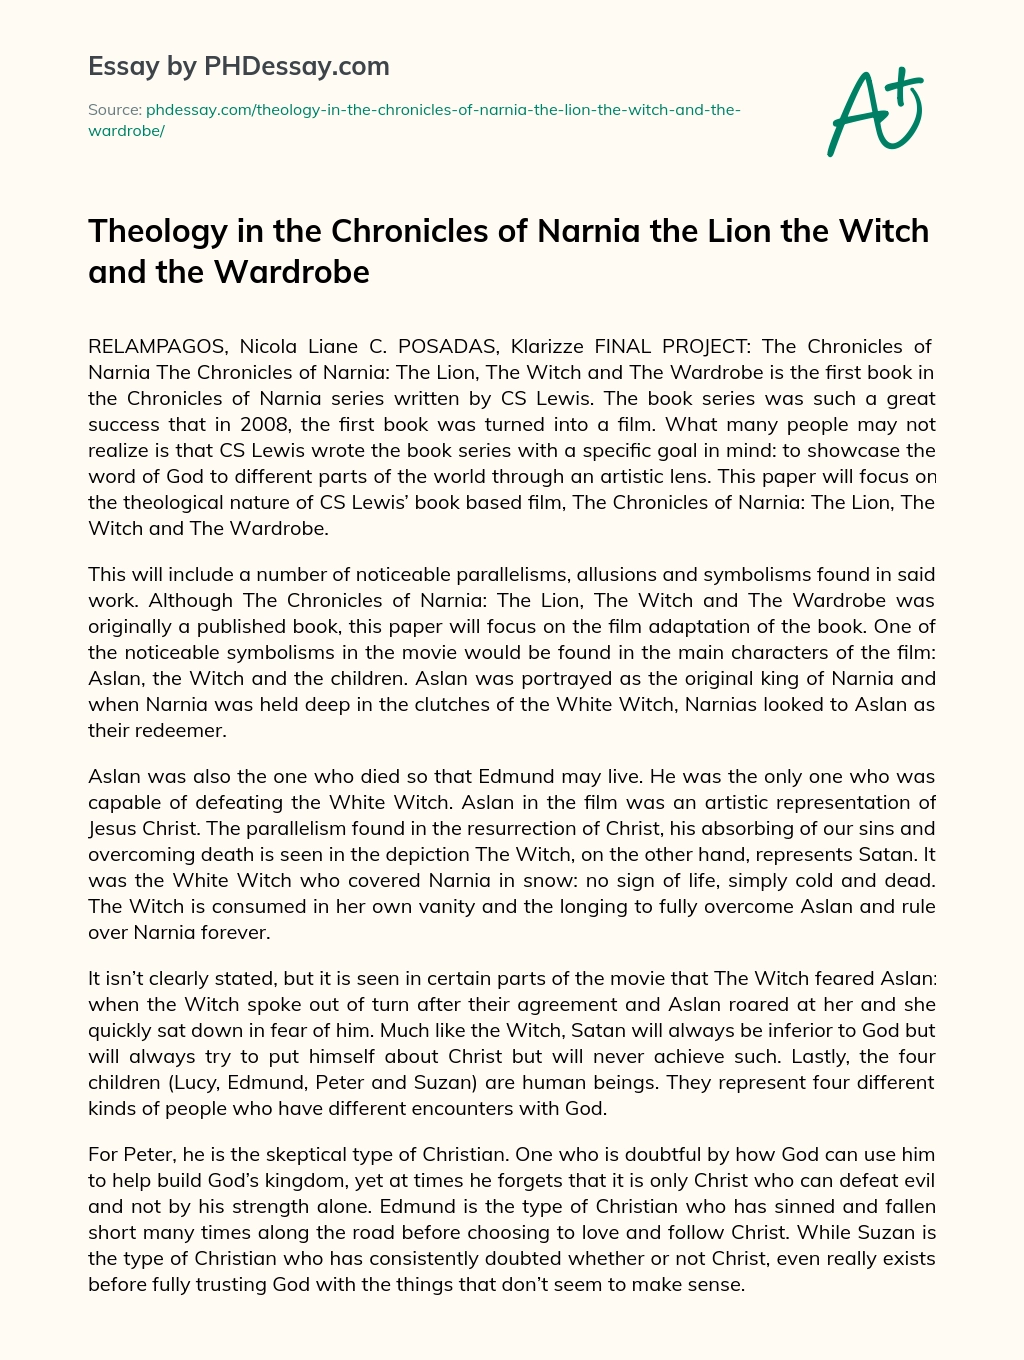 Theology in the Chronicles of Narnia the Lion the Witch and the Wardrobe essay